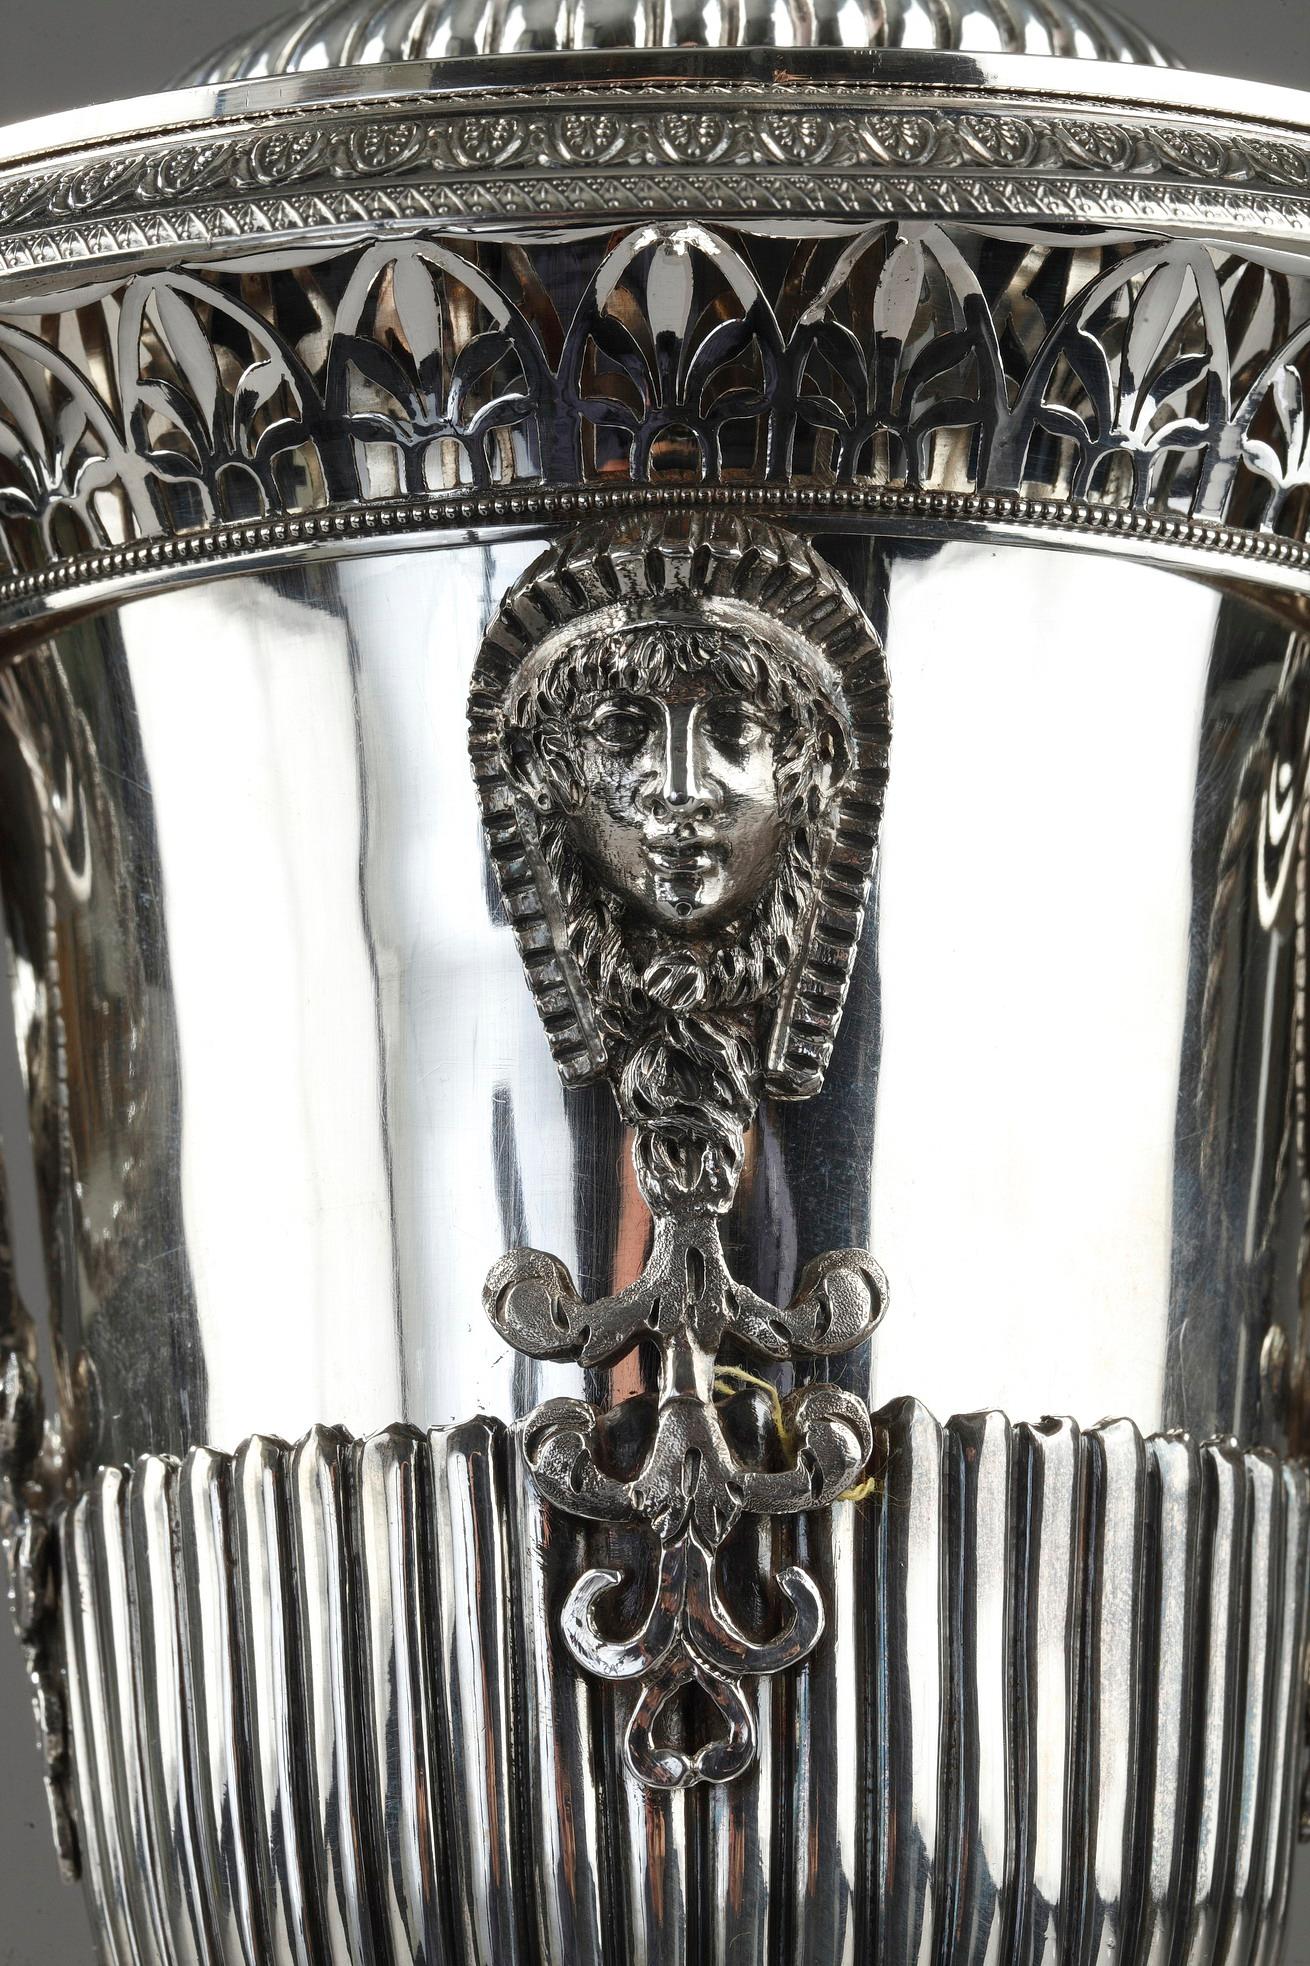 Early 19th century silver drageoir or candy dish adorned with Egyptian head and on the collar with openwork palmette motifs. On the two spiral handles are suspended two twisted rings. The base is decorated with curving tubular patterns. The